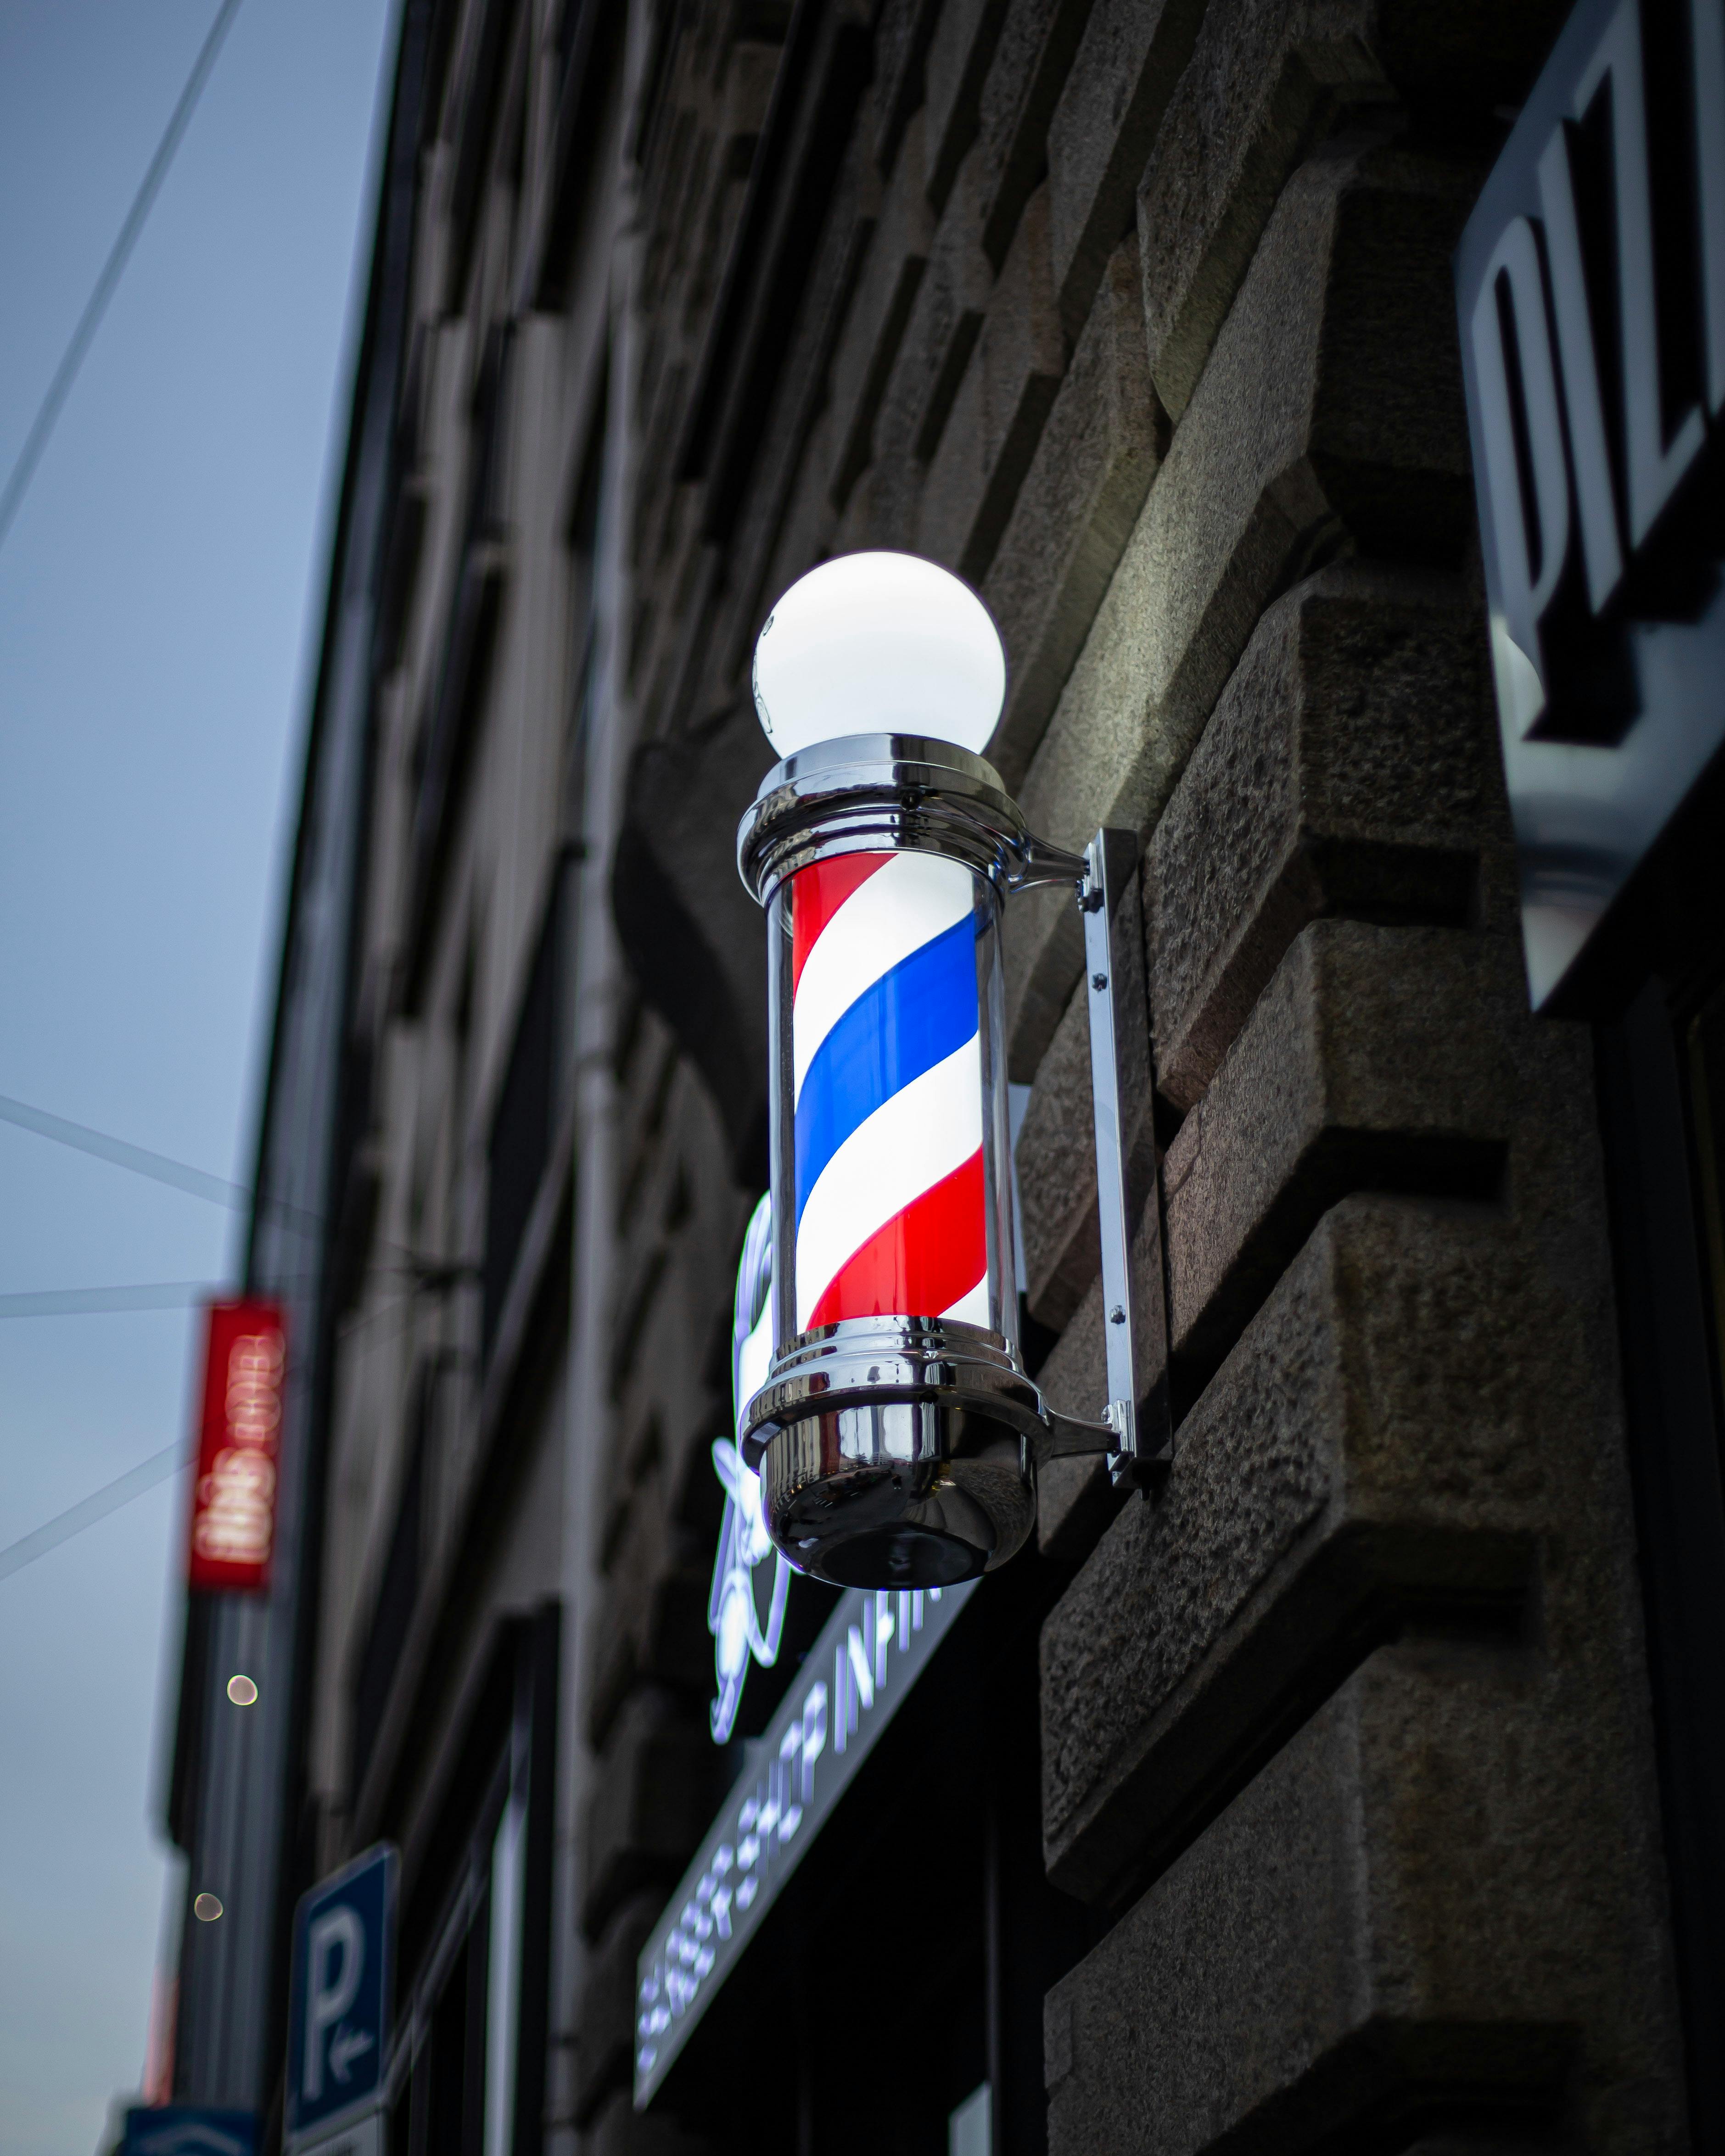 Barber Background Images, HD Pictures and Wallpaper For Free